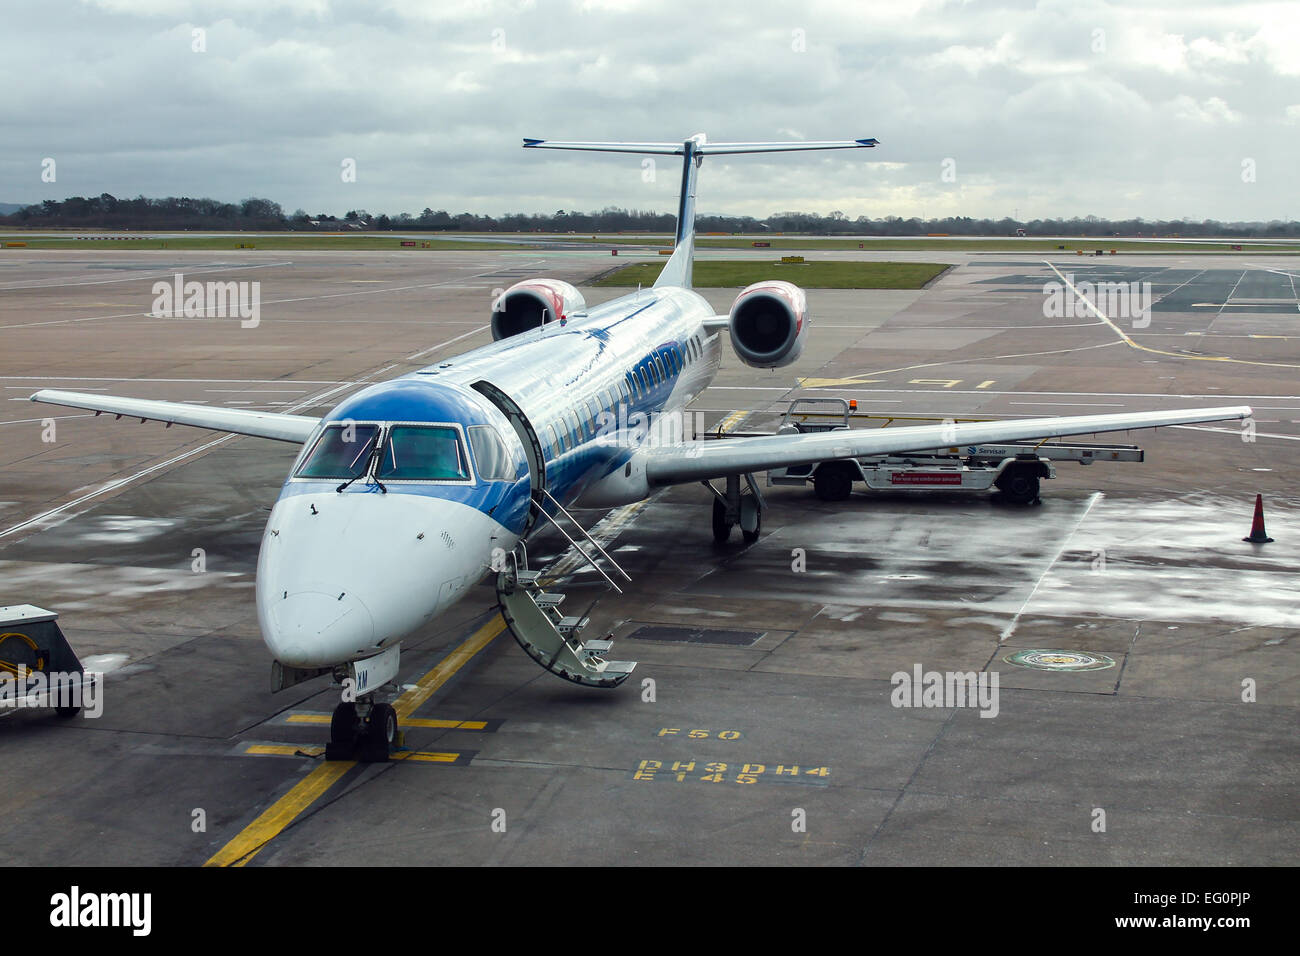 bmi Regional Embraer 145 waits for passengers at Manchester airport. Stock Photo